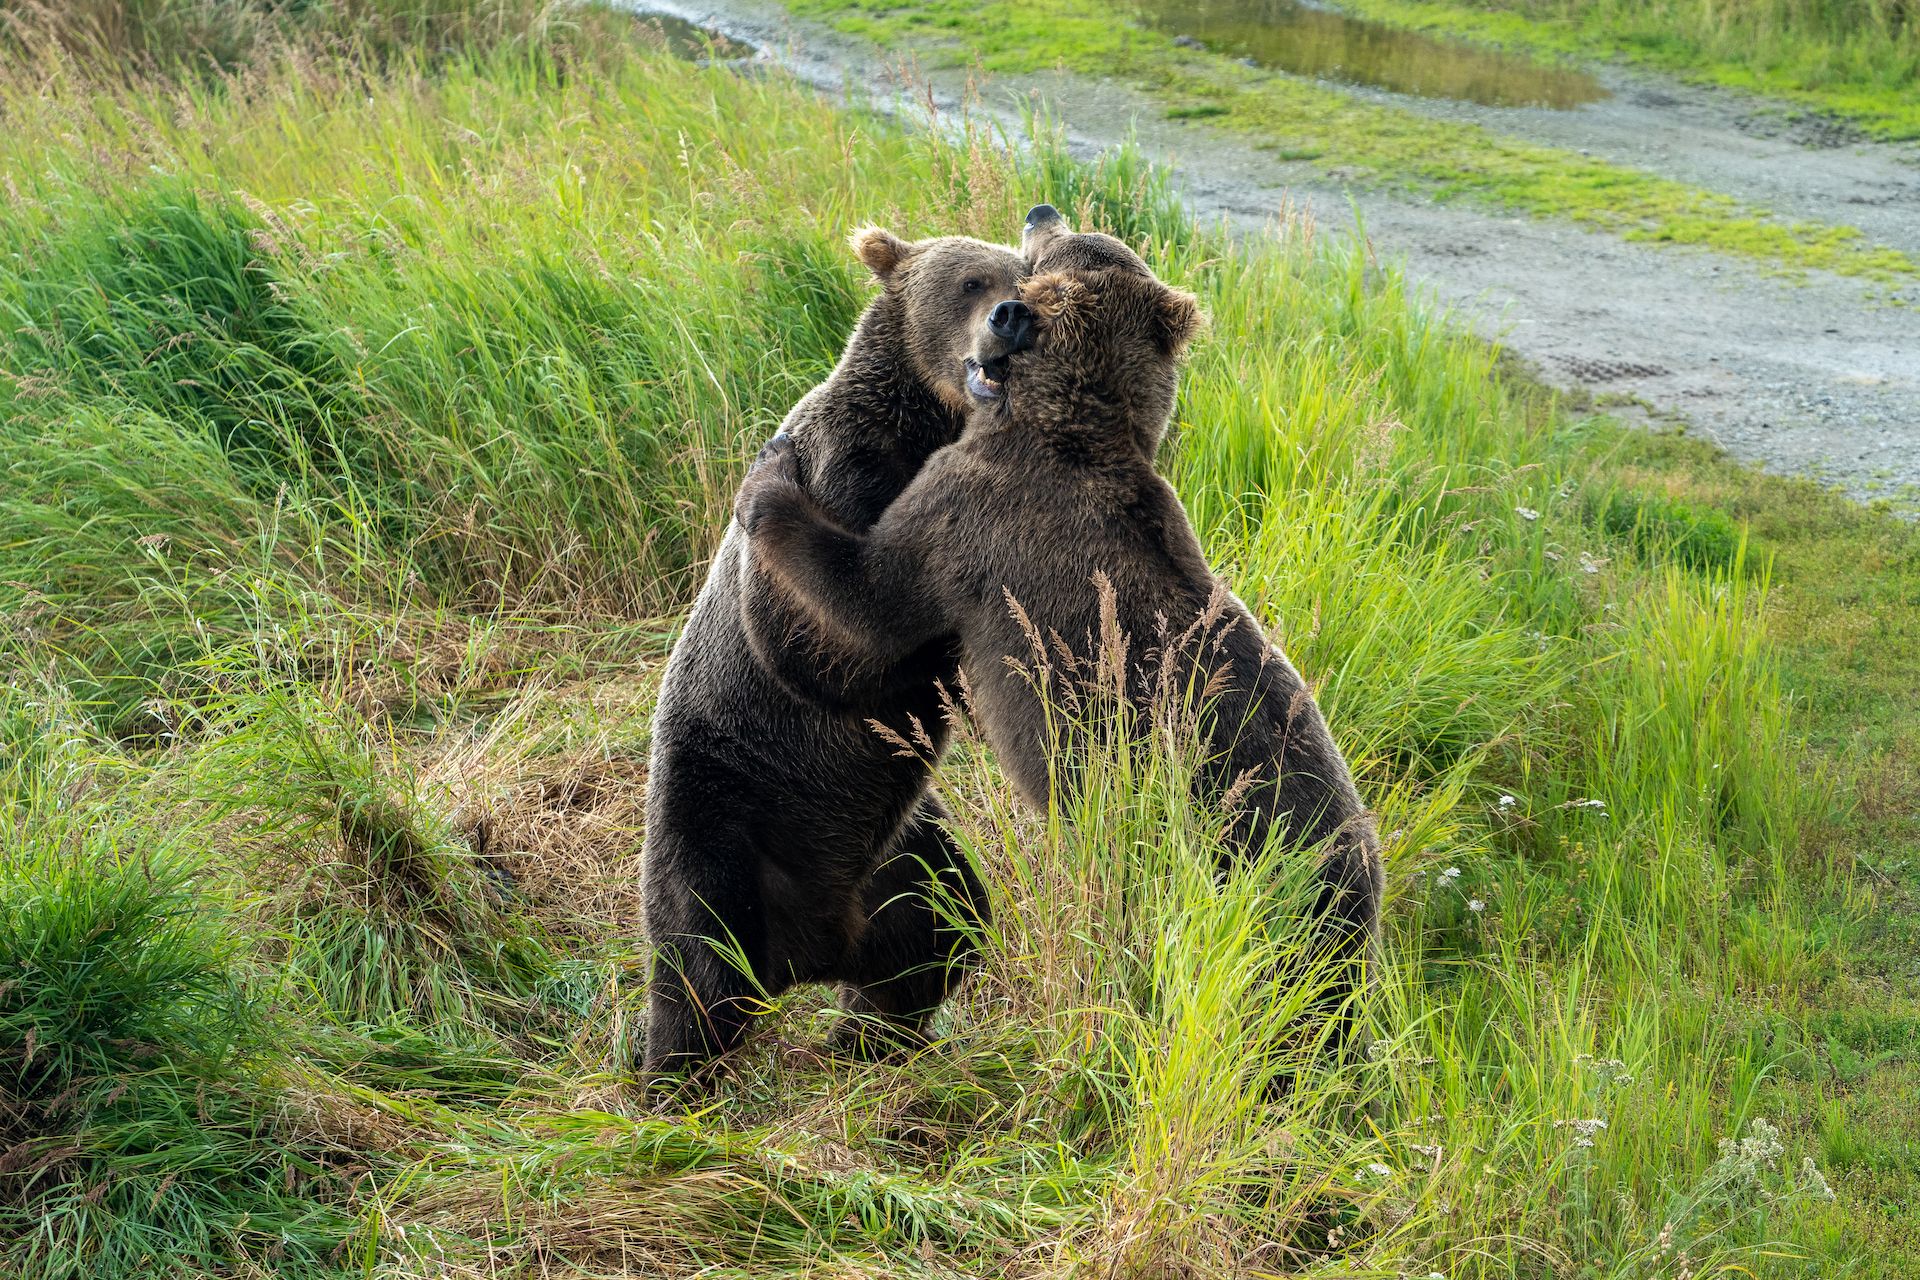 …we could see bears fighting 10 feet from us. And…